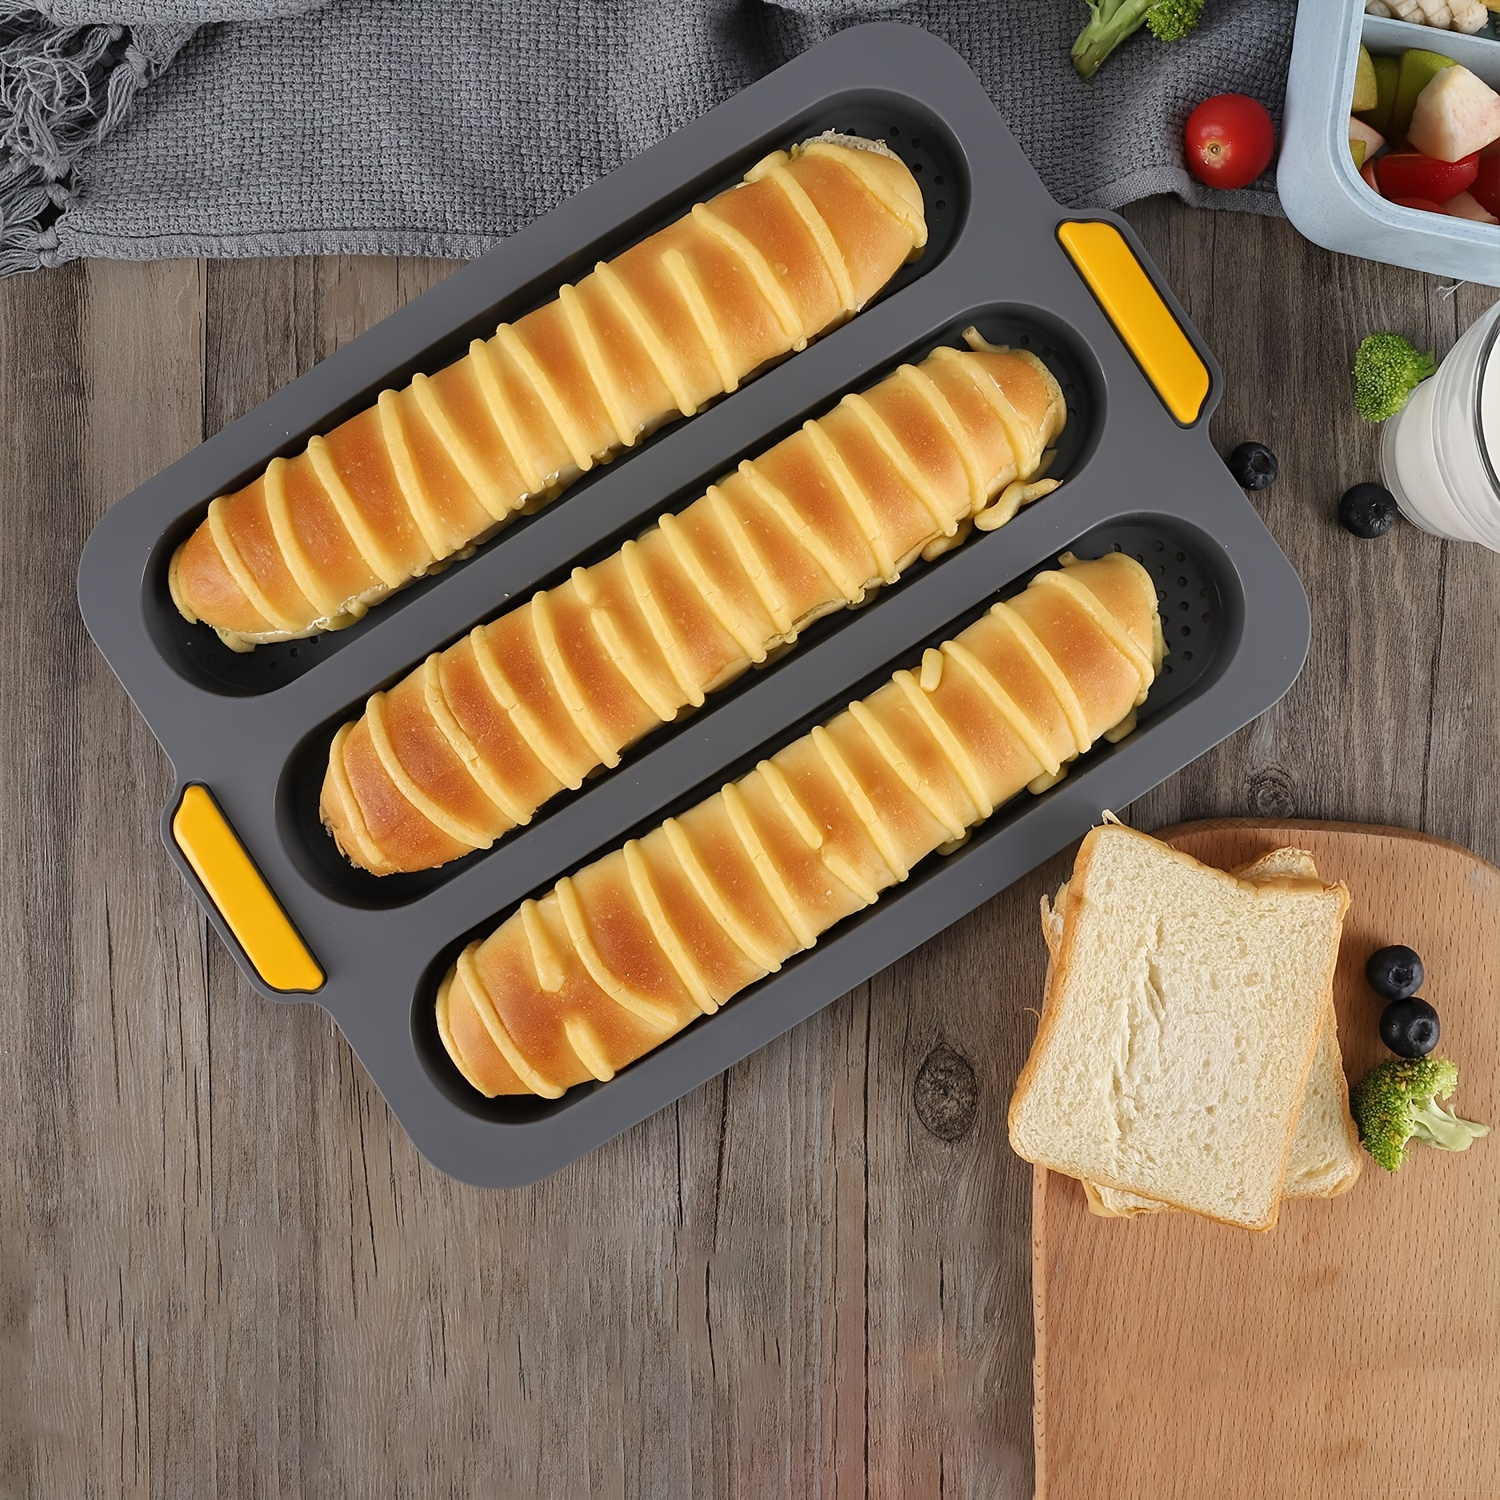 4-Cavity Silicone Loaf Pan Baking Pan for Baking Baguette/Hot Dog Bread  Molds Non-Stick & Easy Clean Heat Resistant Silicone - AliExpress